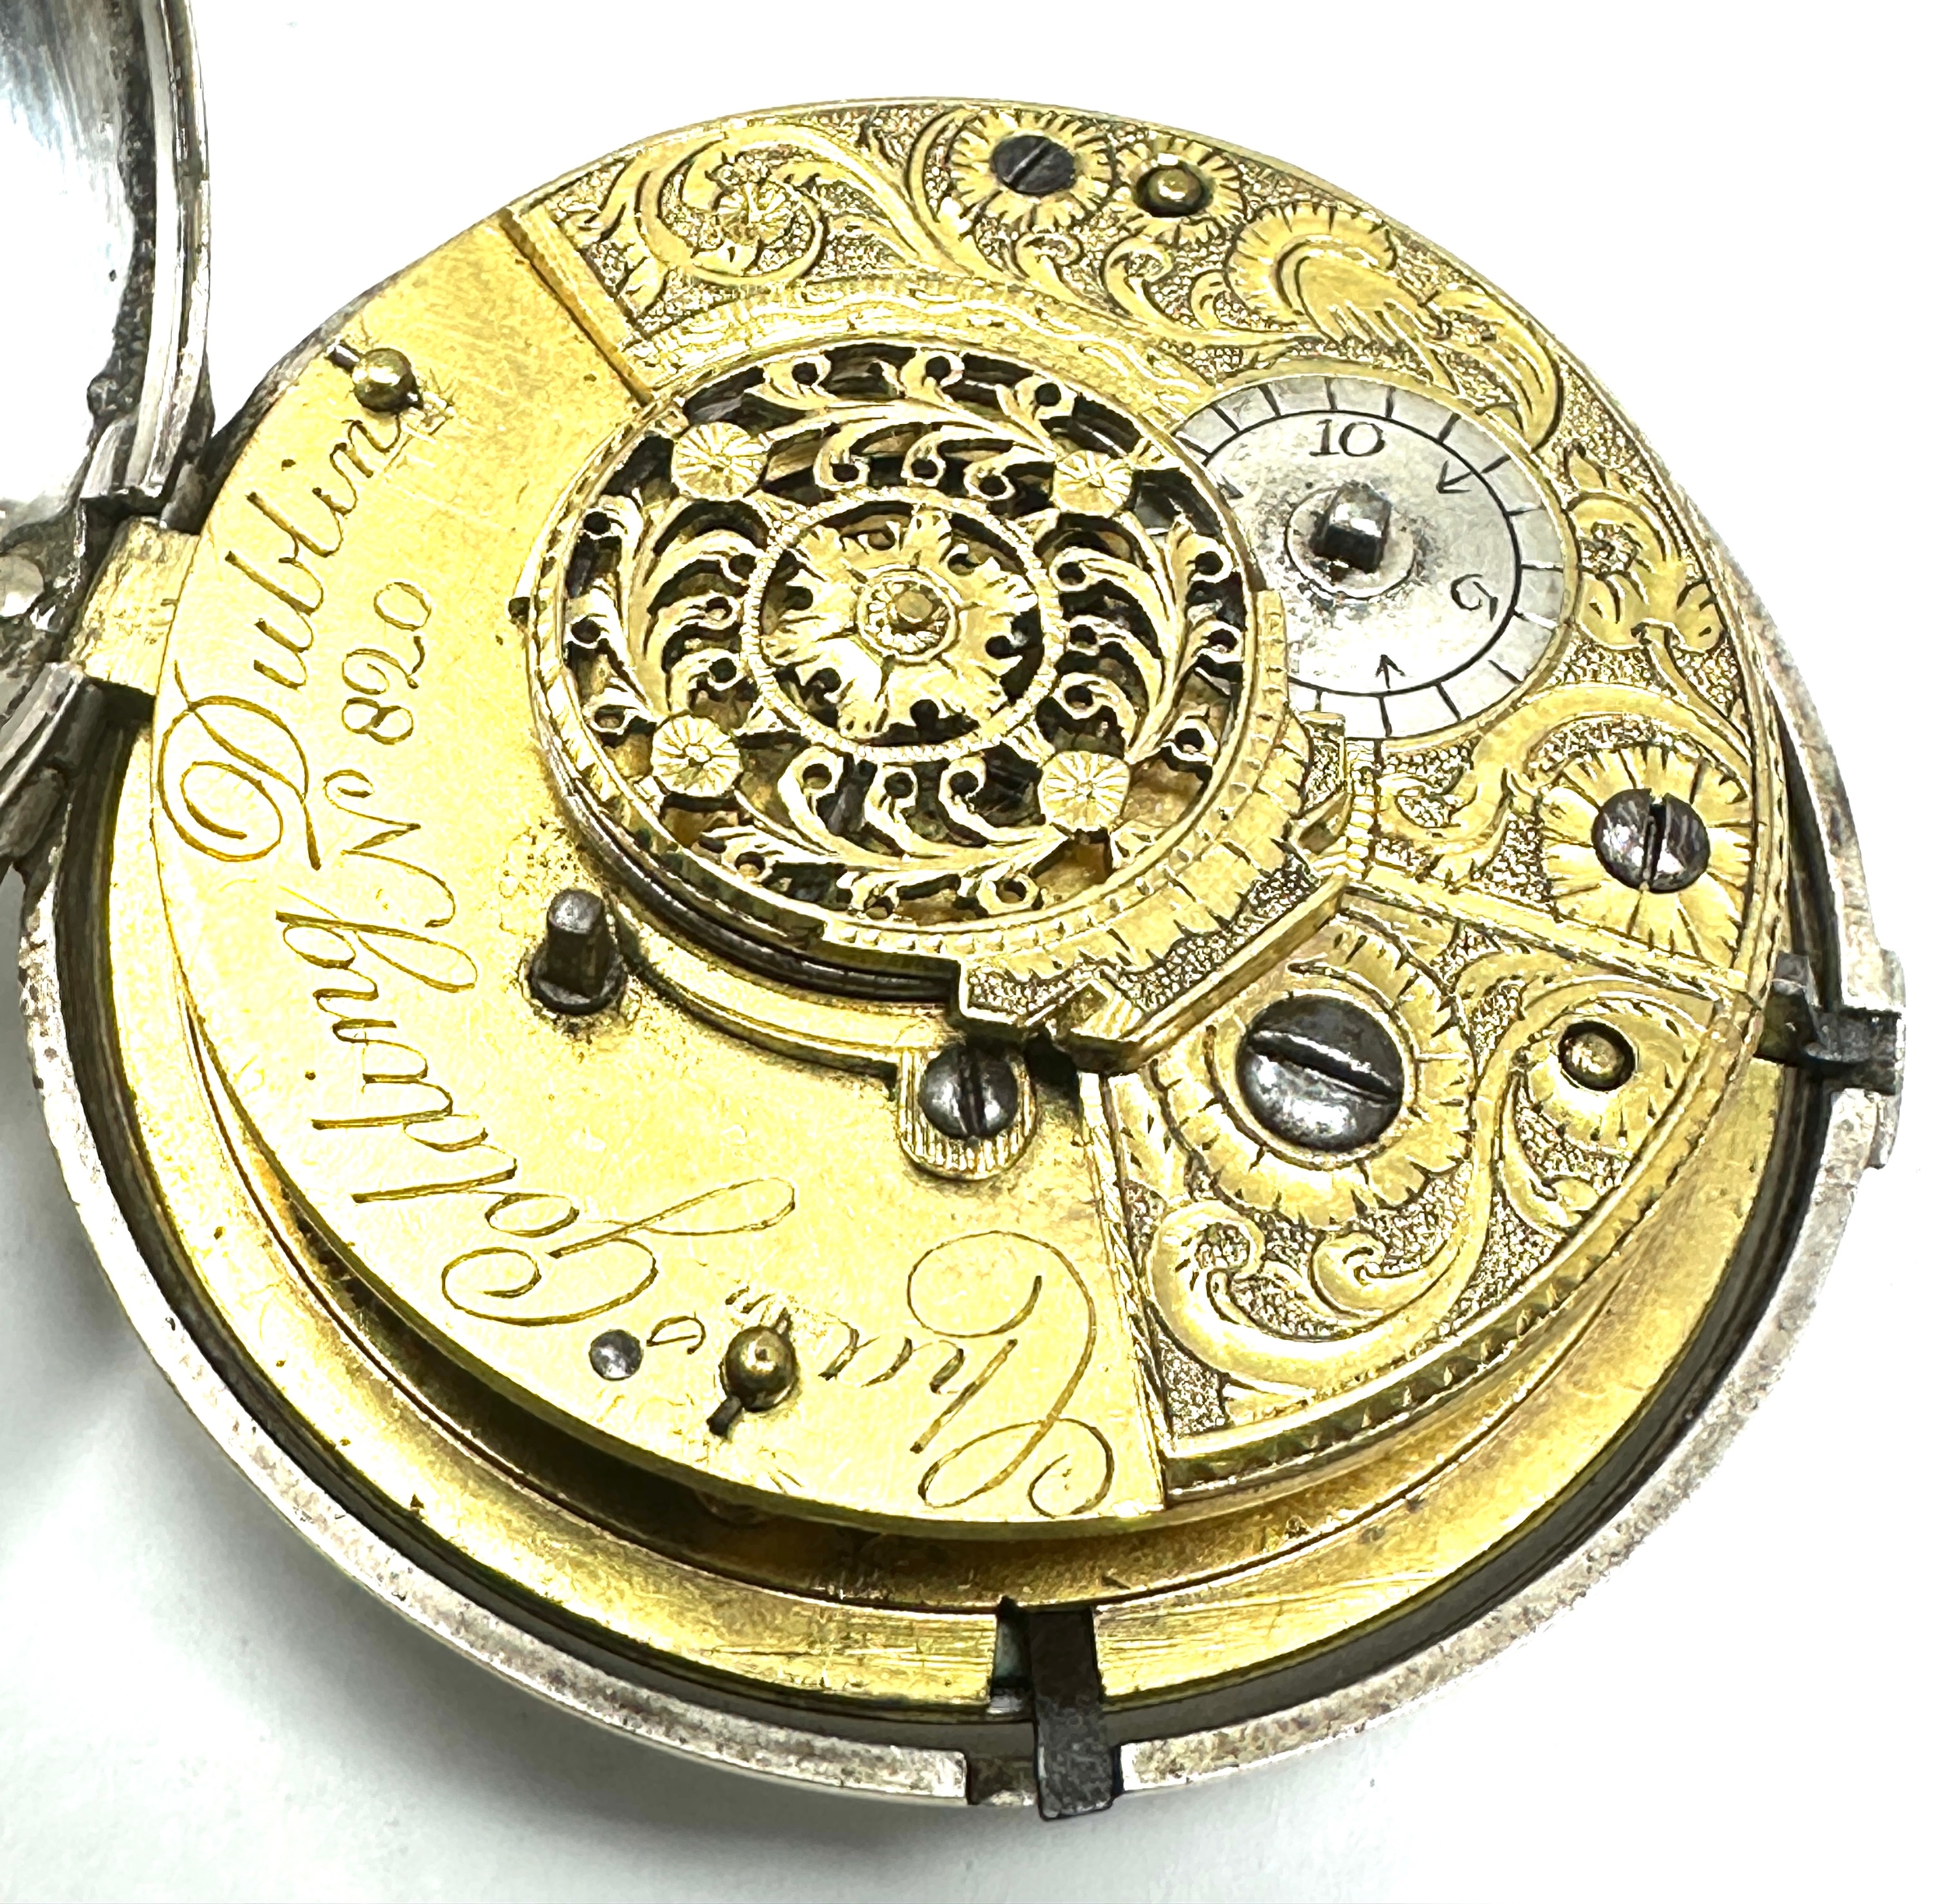 Antique georgian silver verge fusee pair case pocket watch chas golding dublin movement the watch is - Image 4 of 6